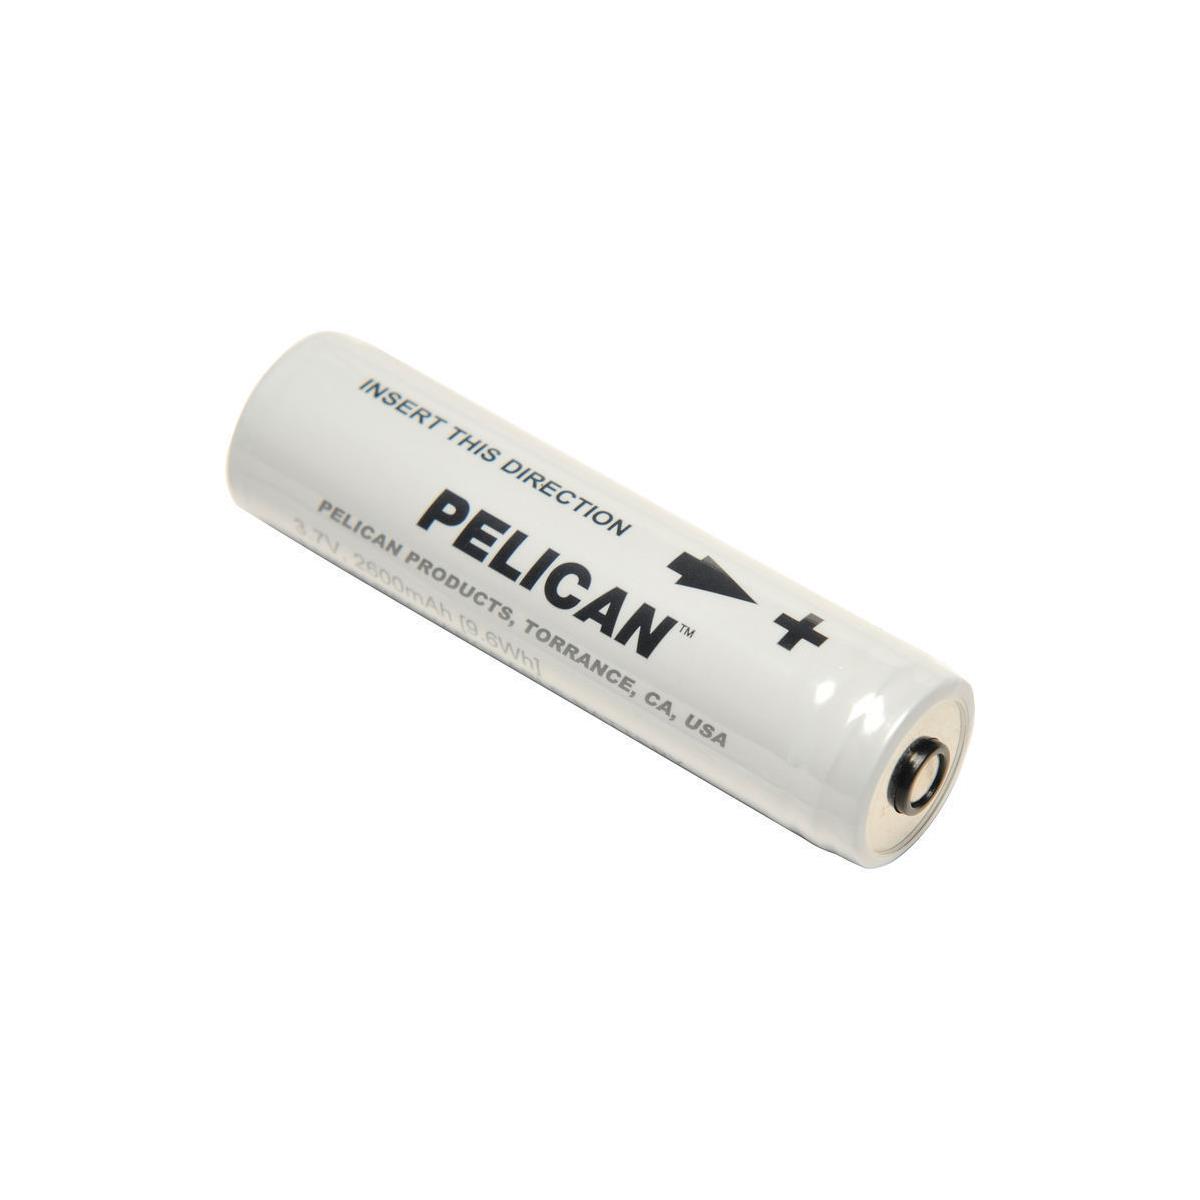 Image of Pelican 18650 Rechargeable 3.7V 2600mAh Lithium-Ion Battery